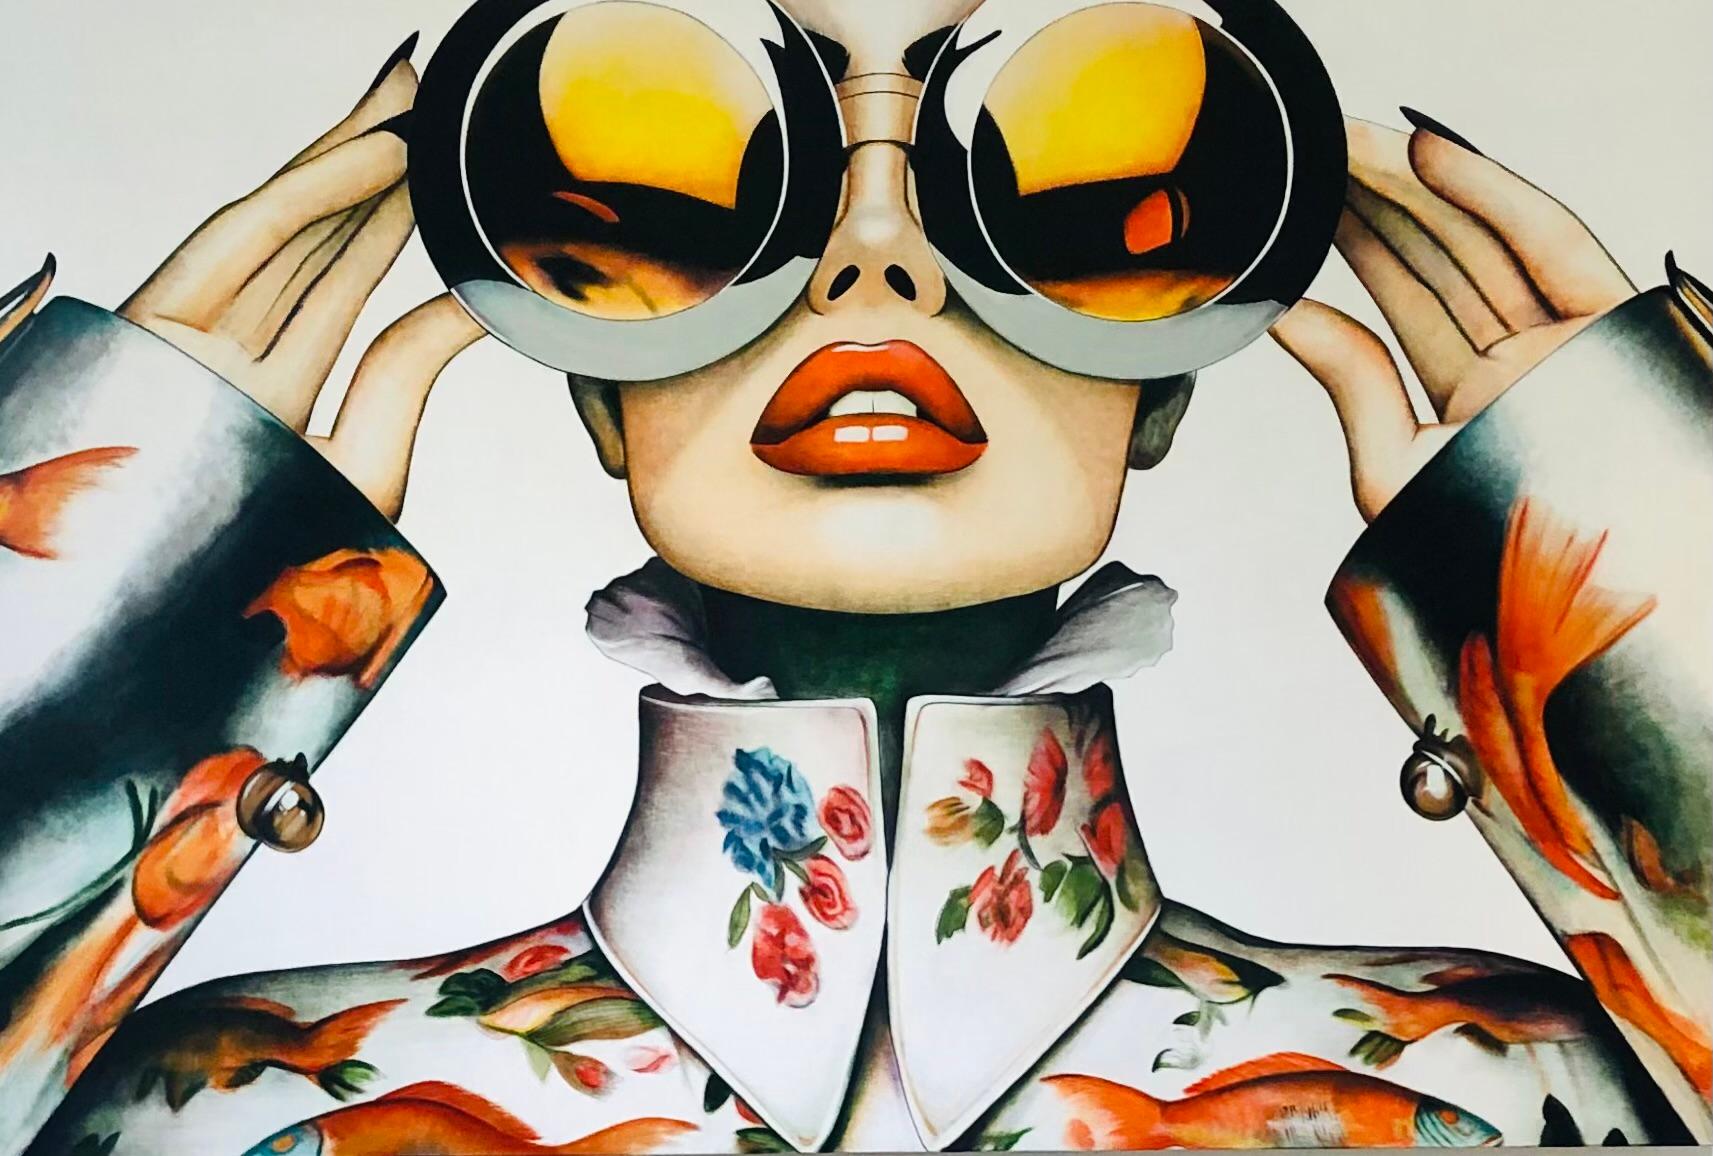 ANJA VAN HERLE
"Sunset Style"
Acrylic on Wood
40 x 60 inches

Born in Belgium in 1969, Anja Van Herle combines a European sense of high fashion in her artwork with an American sense of wonder. Her childhood years were devoted to exploring the